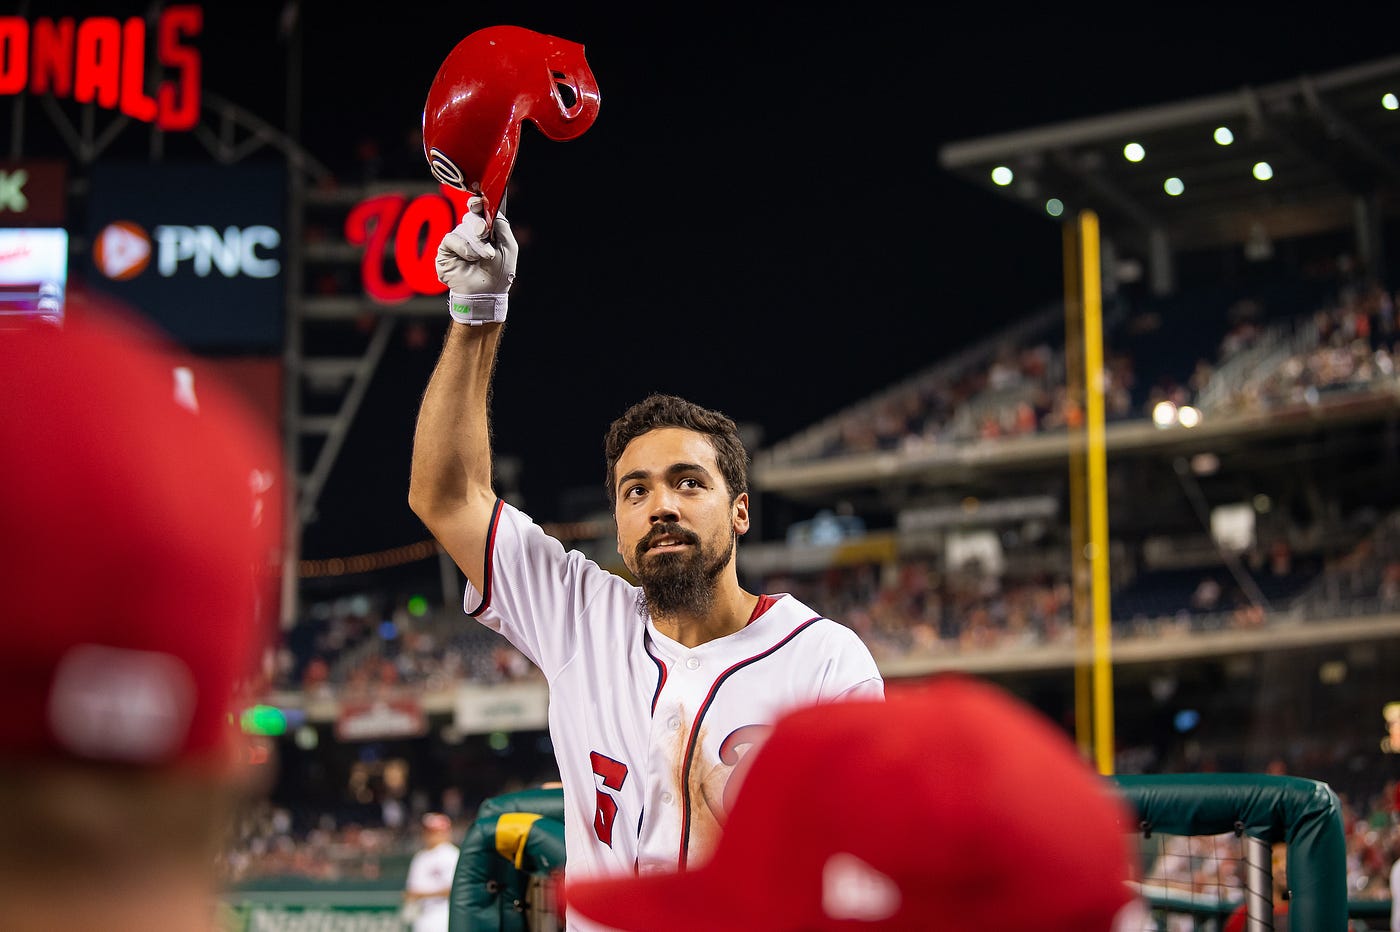 Homestand Highlights (August 11–20), by Nationals Communications